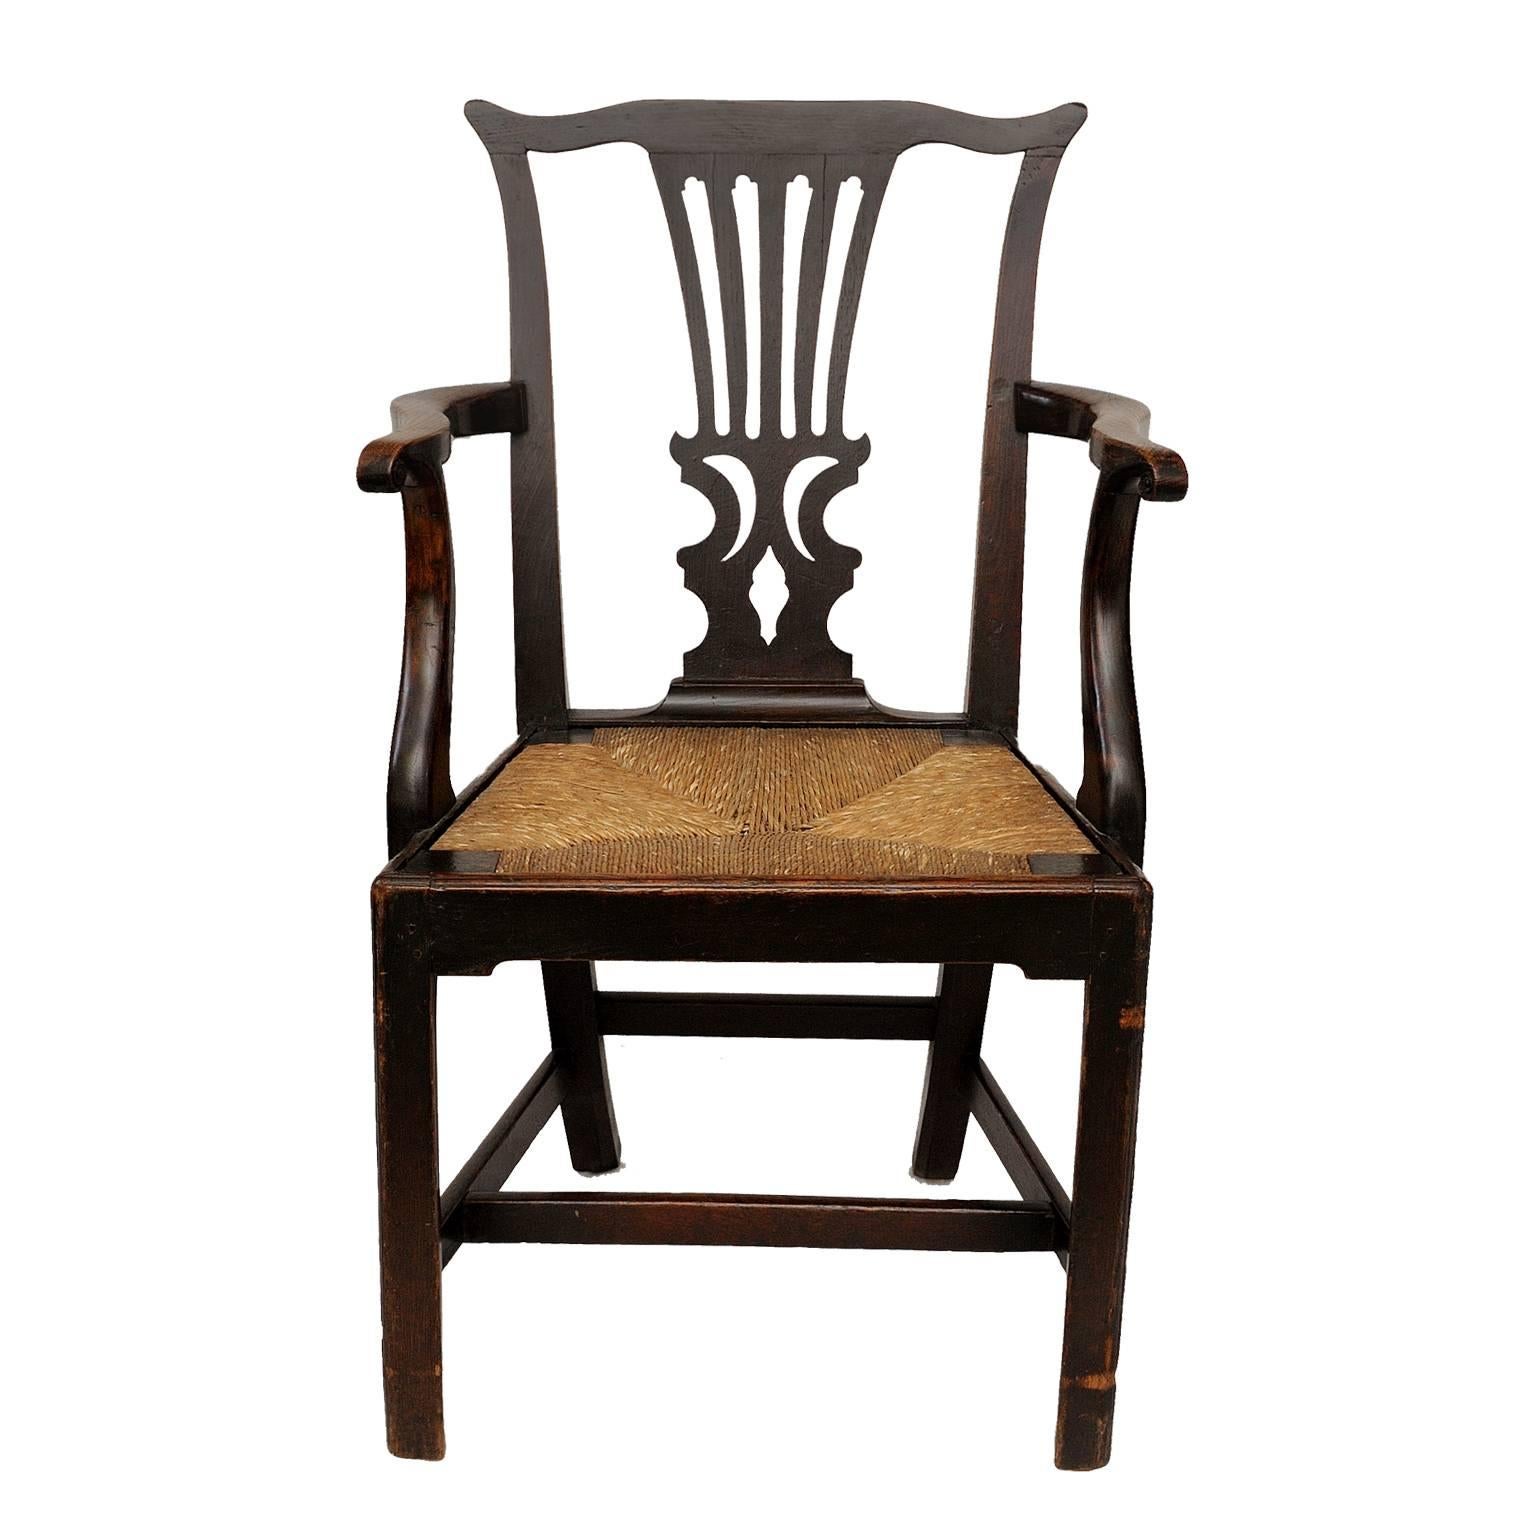 This really is a handsome English George III mid-18th century Country Chippendale open-arm or desk chair with a rush seat, a lovely example of its type, circa 1760.